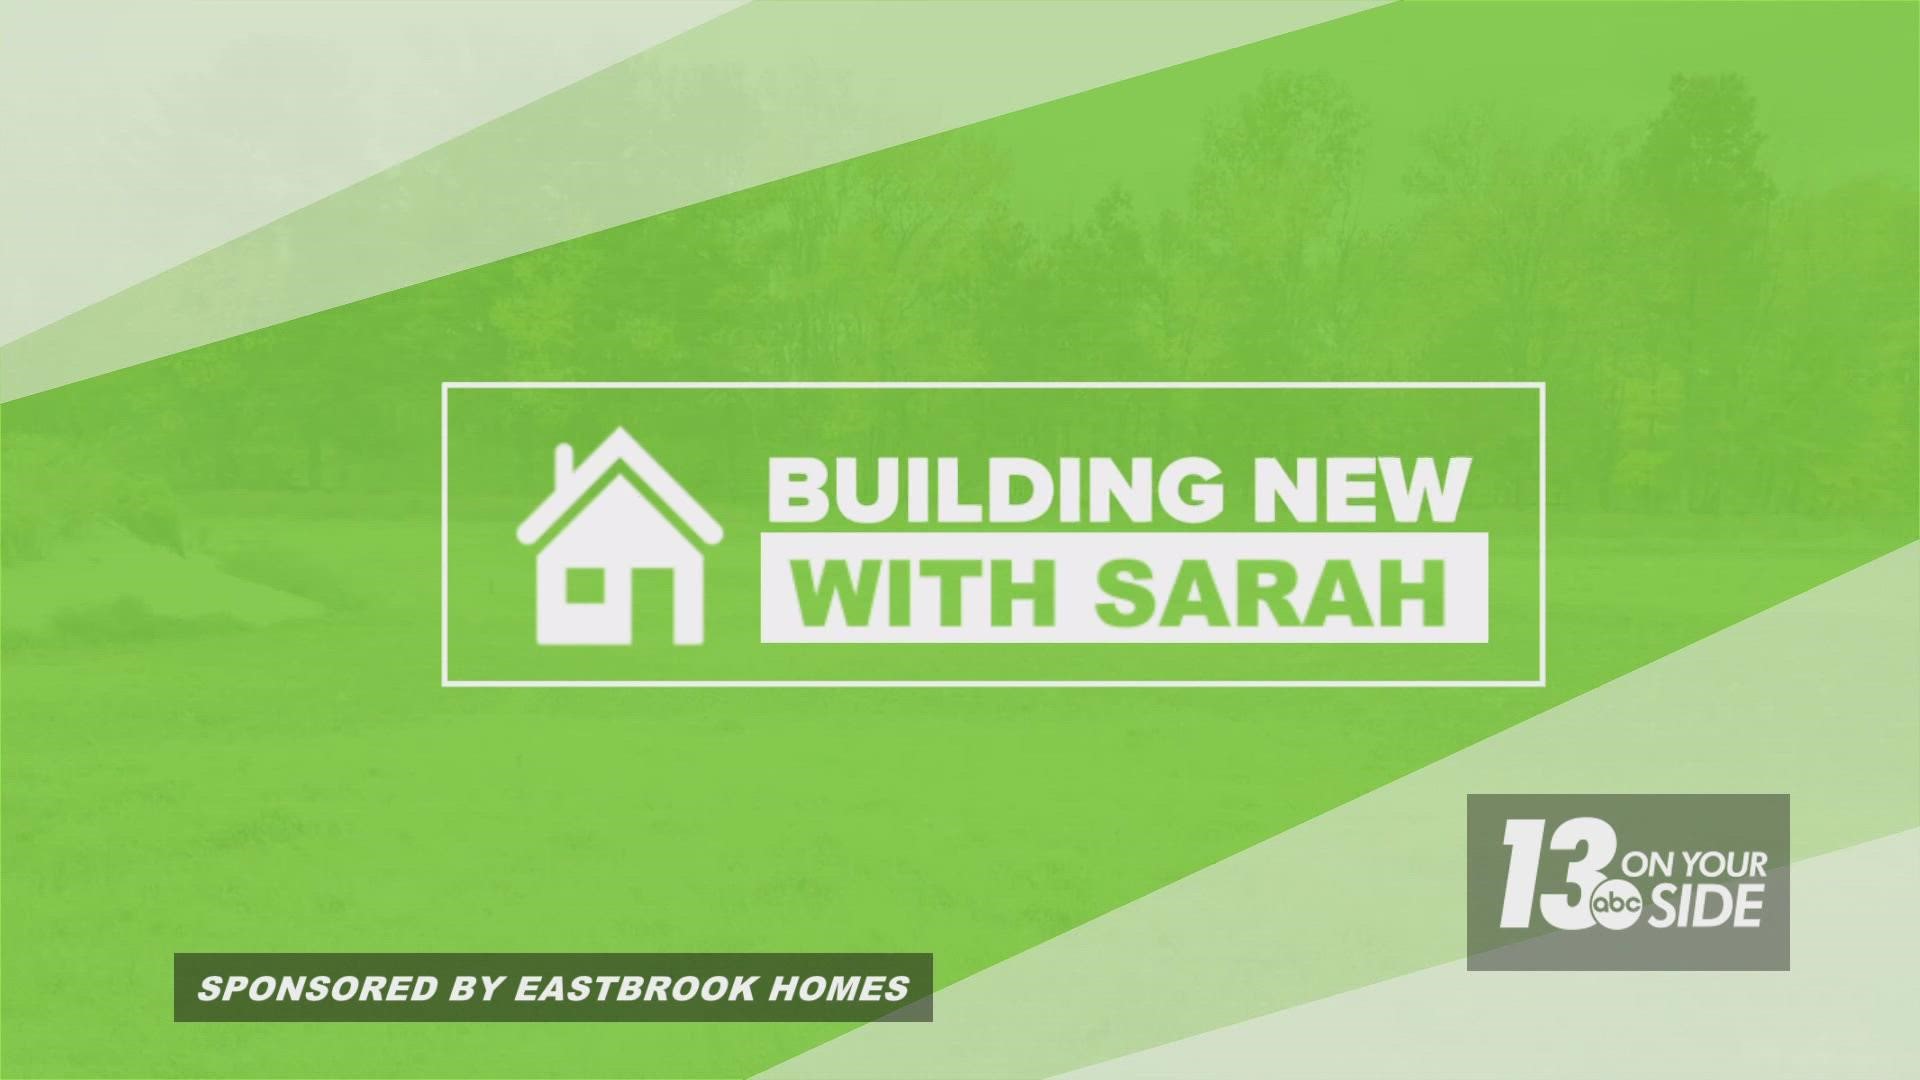 Imagine being able to build your dream home, from the bottom-up. Sarah Wilkins is doing just that, and we’re going to follow along.